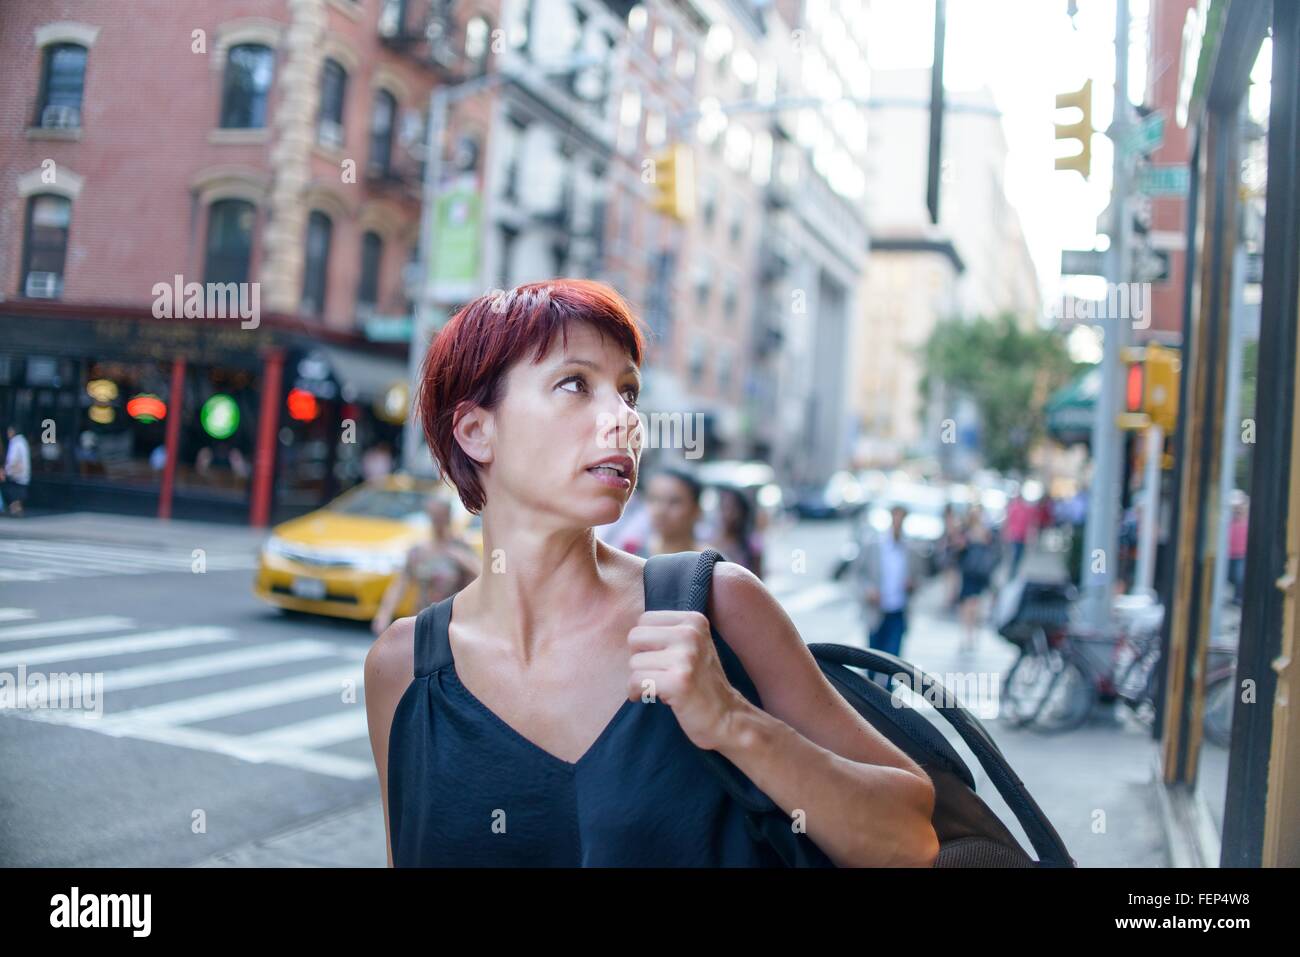 Mature woman looking over her shoulder on city street Stock Photo